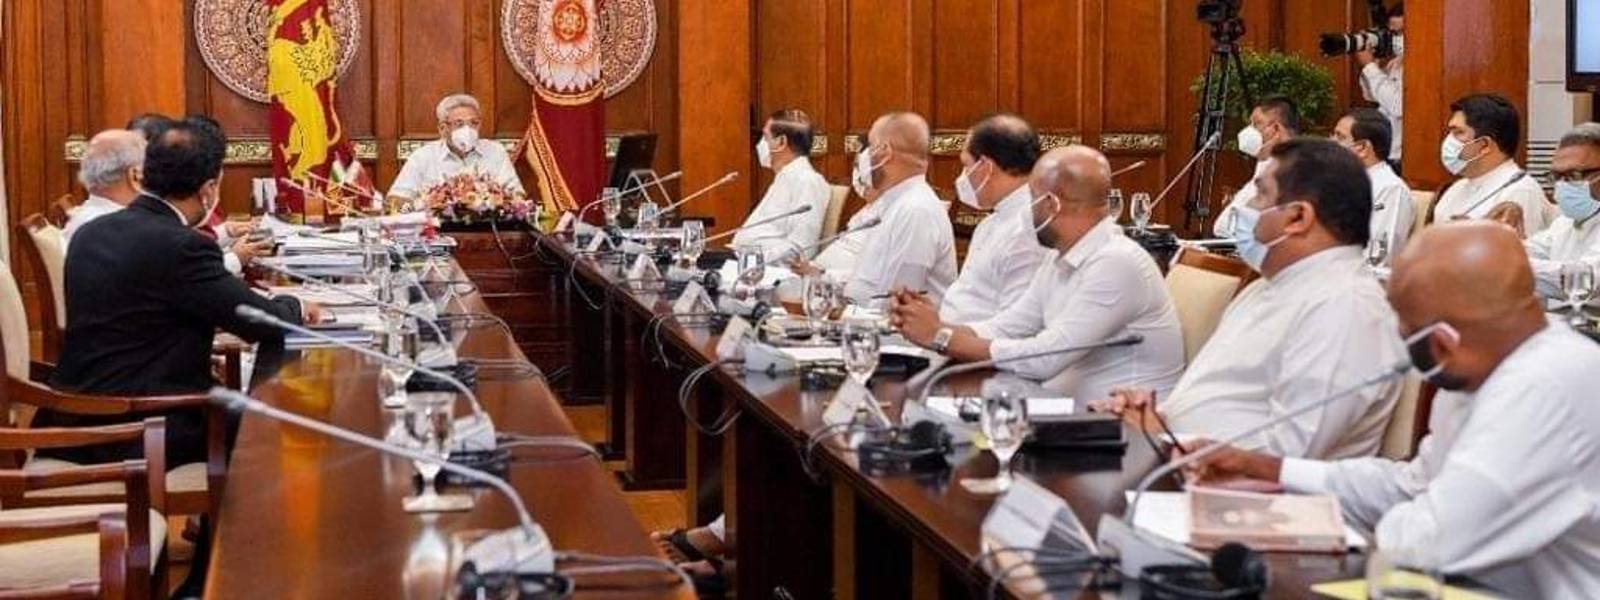 President meets with several SLFP MPs